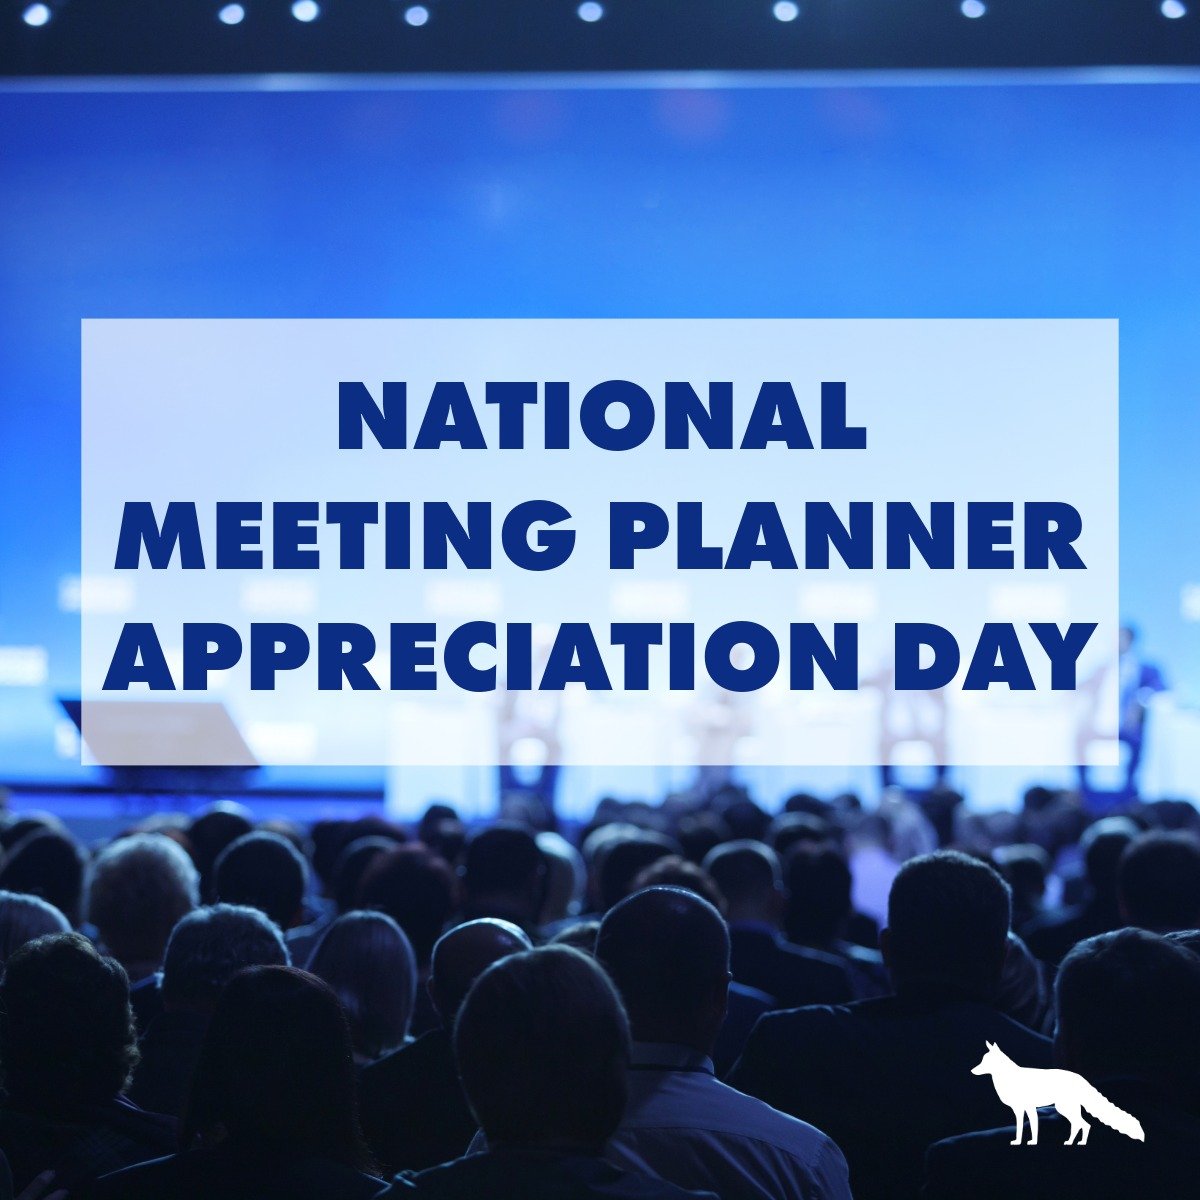 We'd like to take a moment to say thank you to all of the amazing event planners out there! We appreciate you and all of the hard work behind the scenes and on the stage to make events a success! 

#NationalMeetingsPlannersAppreciationDay #eventprofs